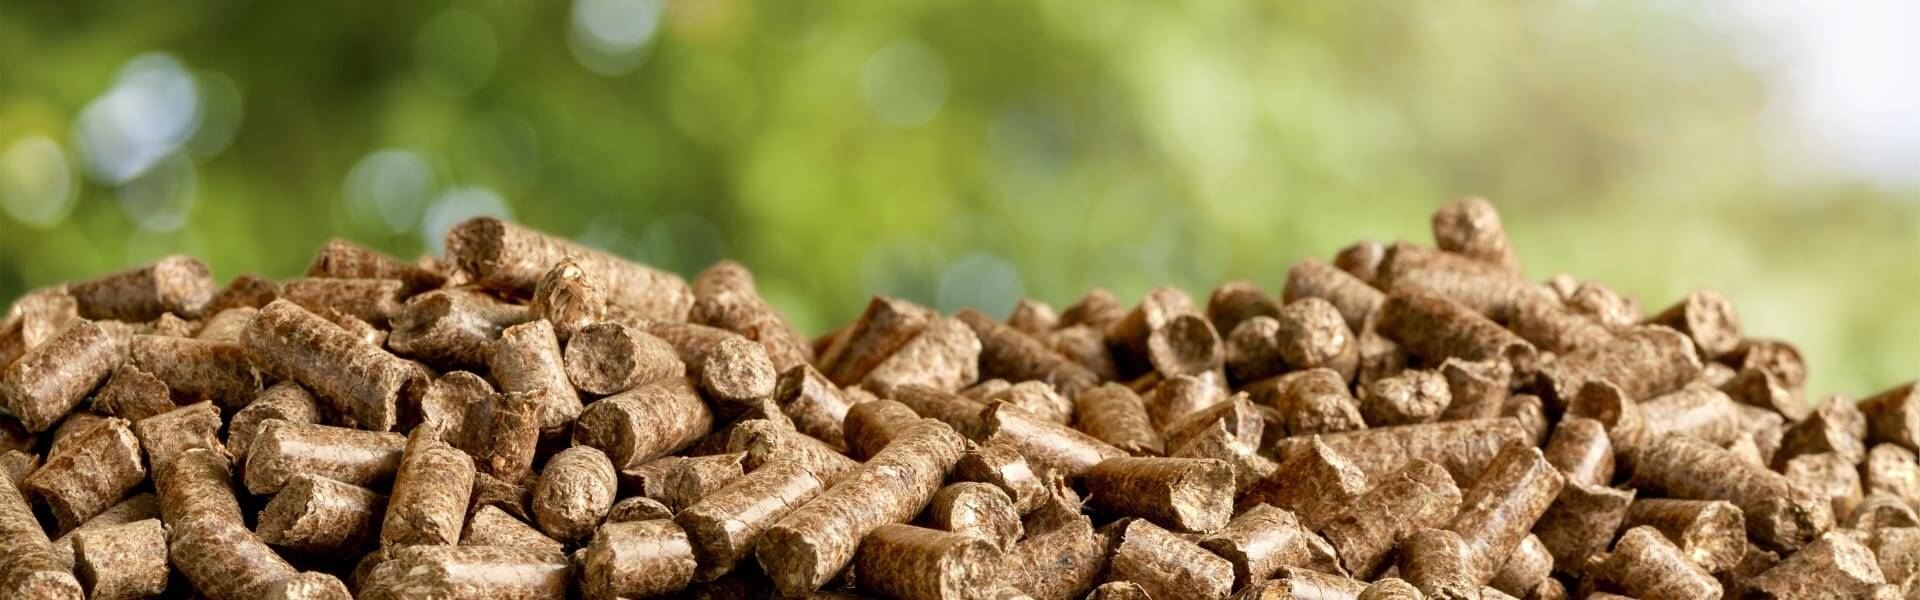 Bioenergy with carbon capture ‘will not deliver negative emissions’